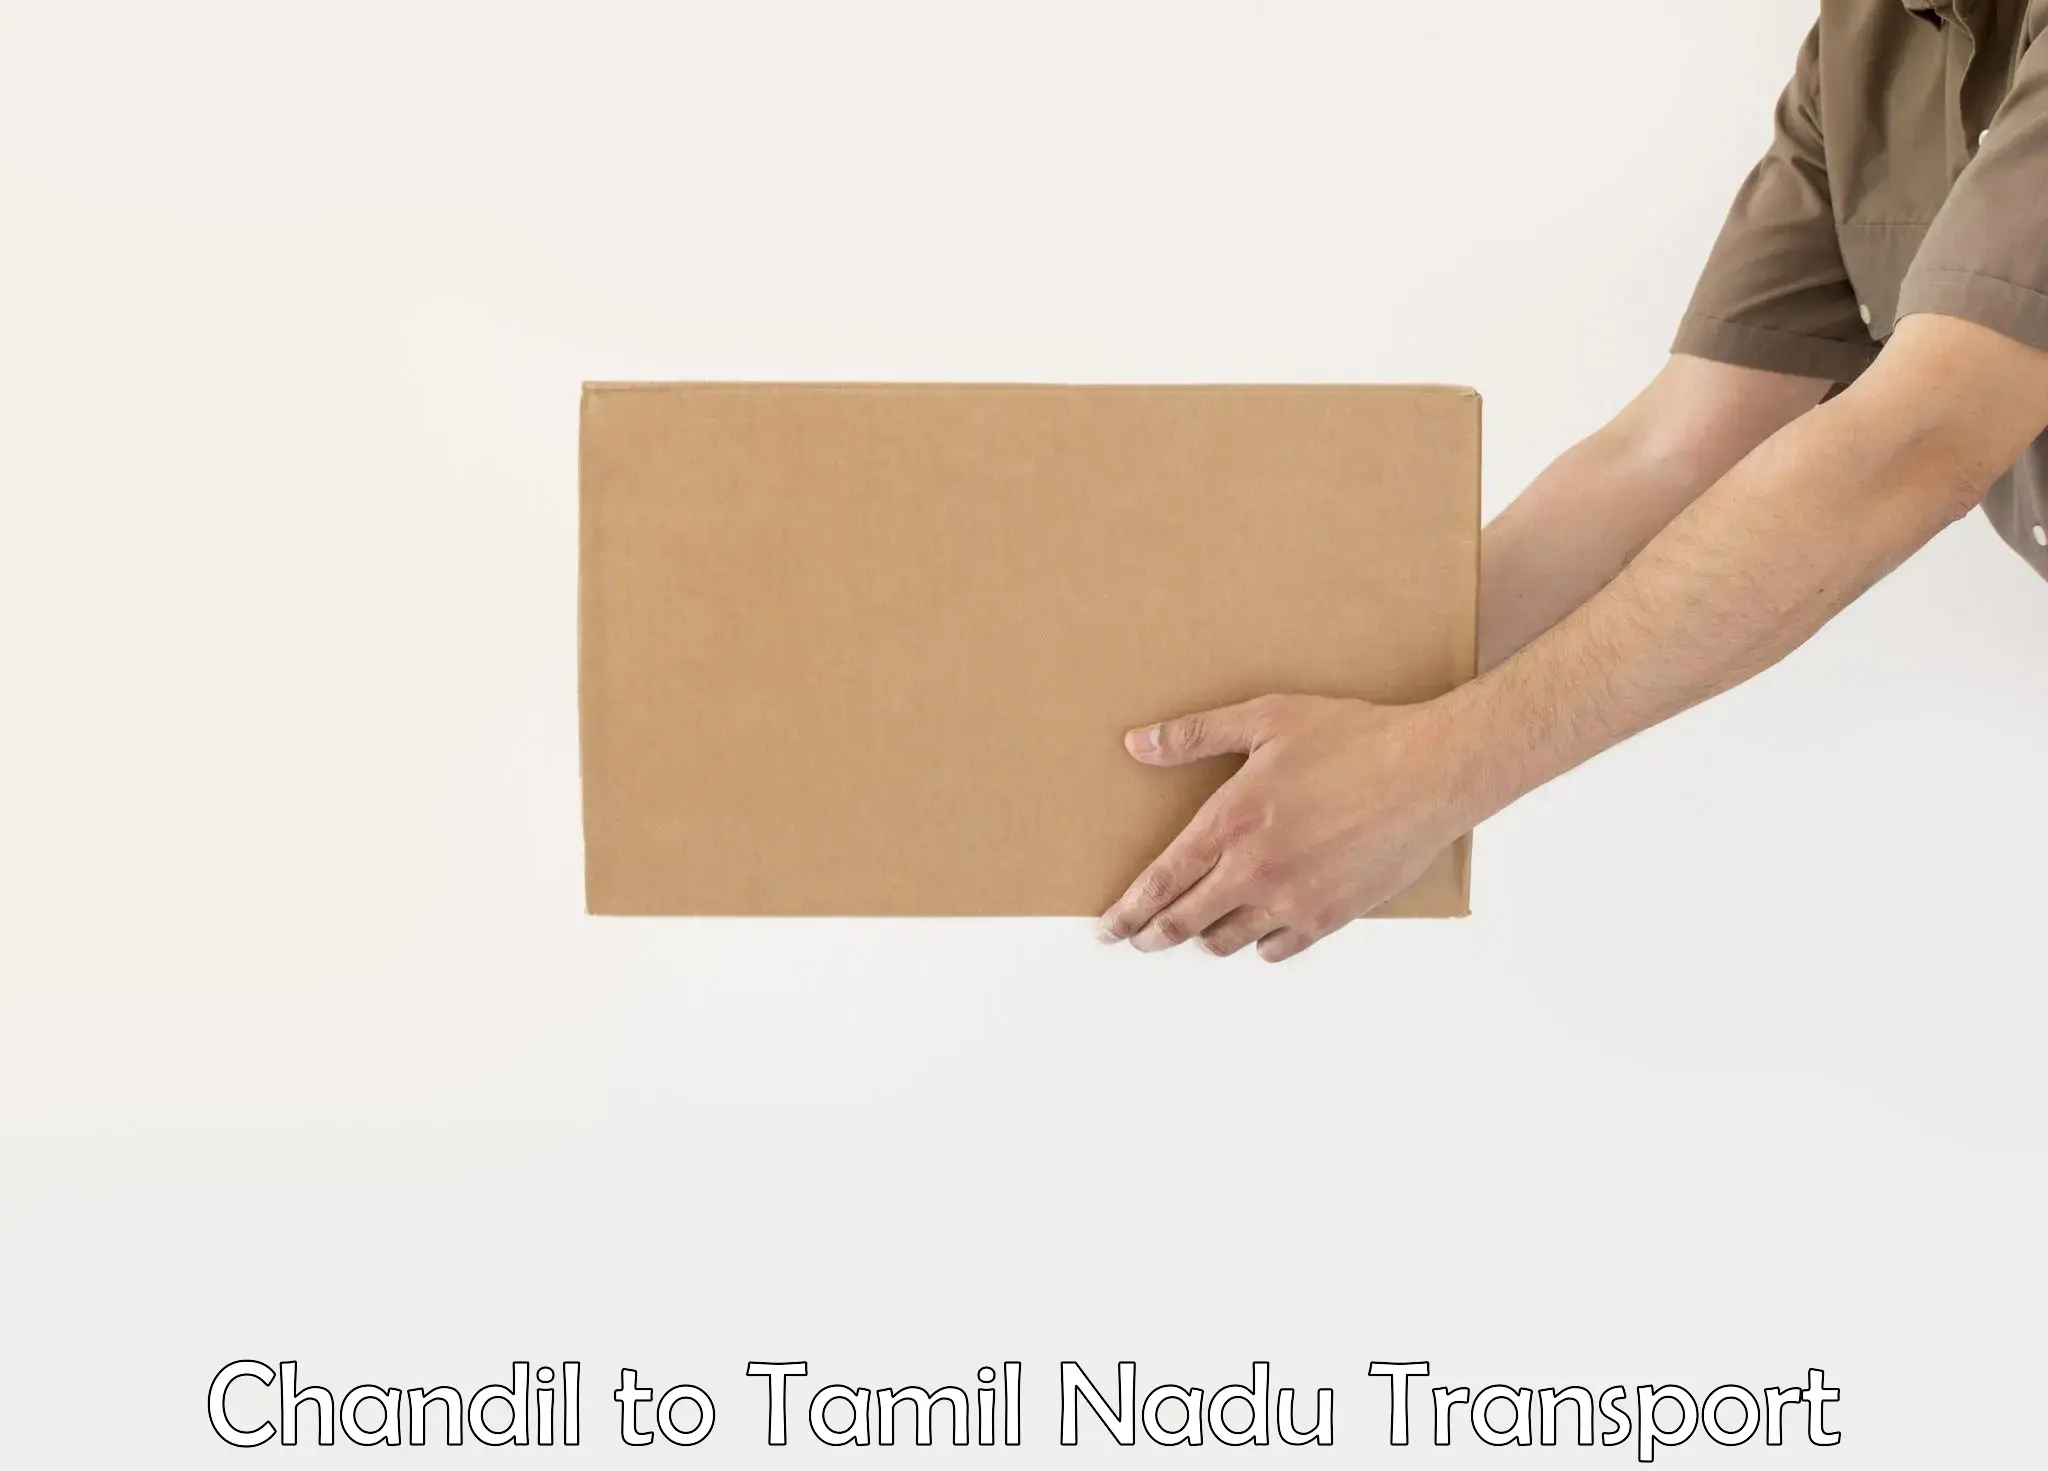 Cargo transportation services Chandil to Coimbatore